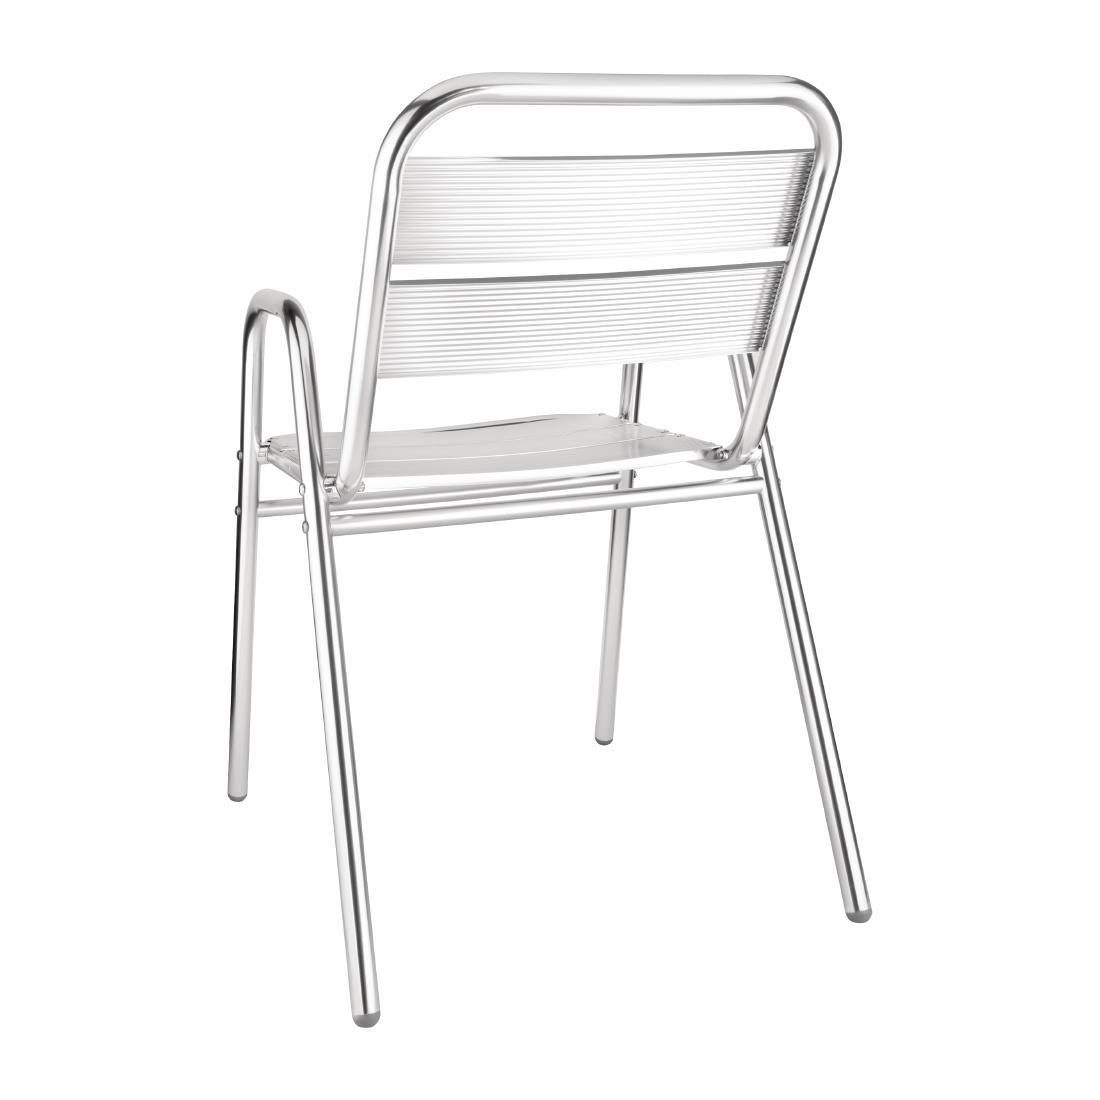 Bolero Aluminium Stacking Chairs Arched Arms (Pack of 4) - U501  - 3